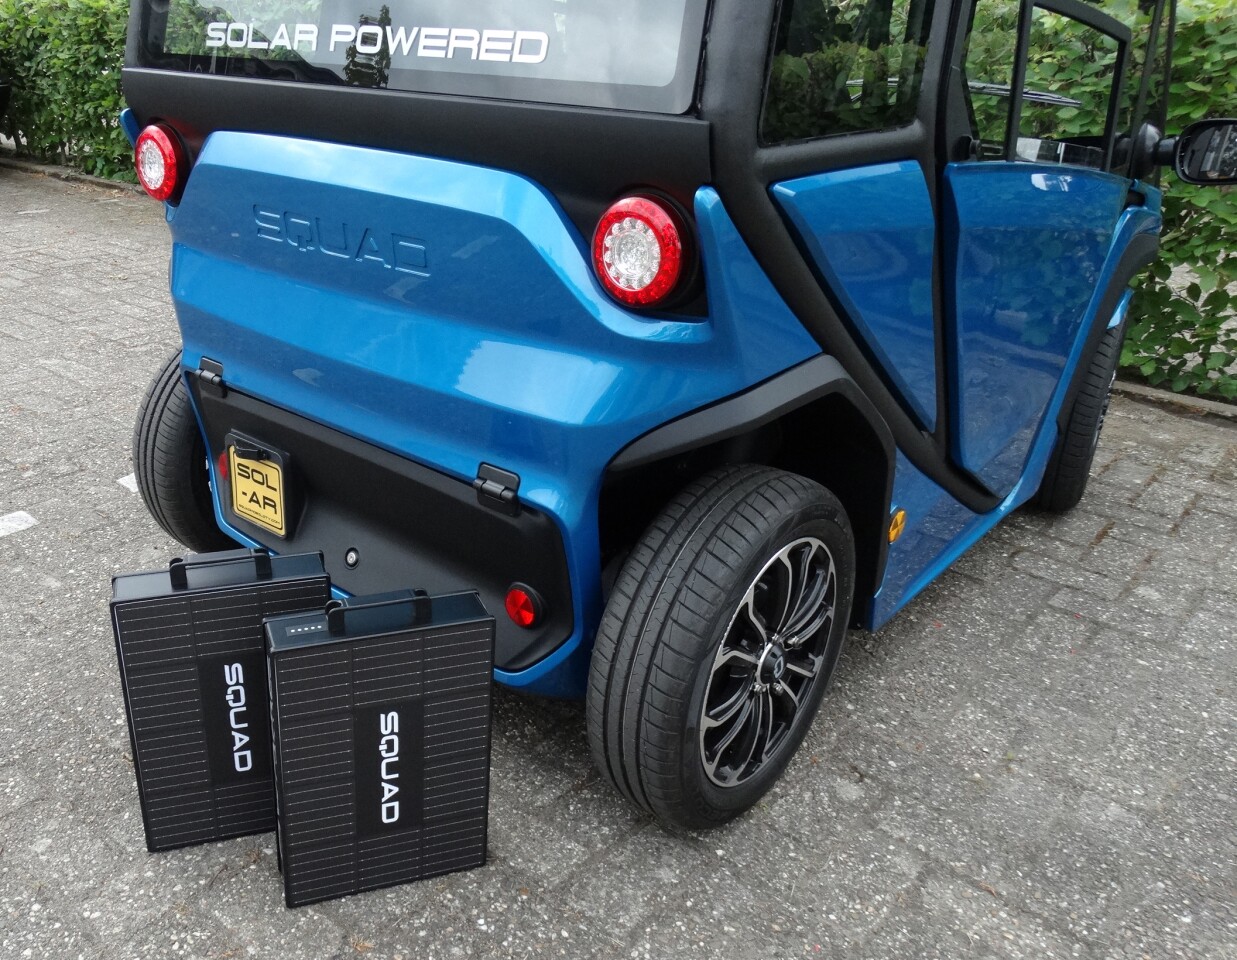 If solar charging proves insufficient, the portable batteries are designed to be easy to charge and swap